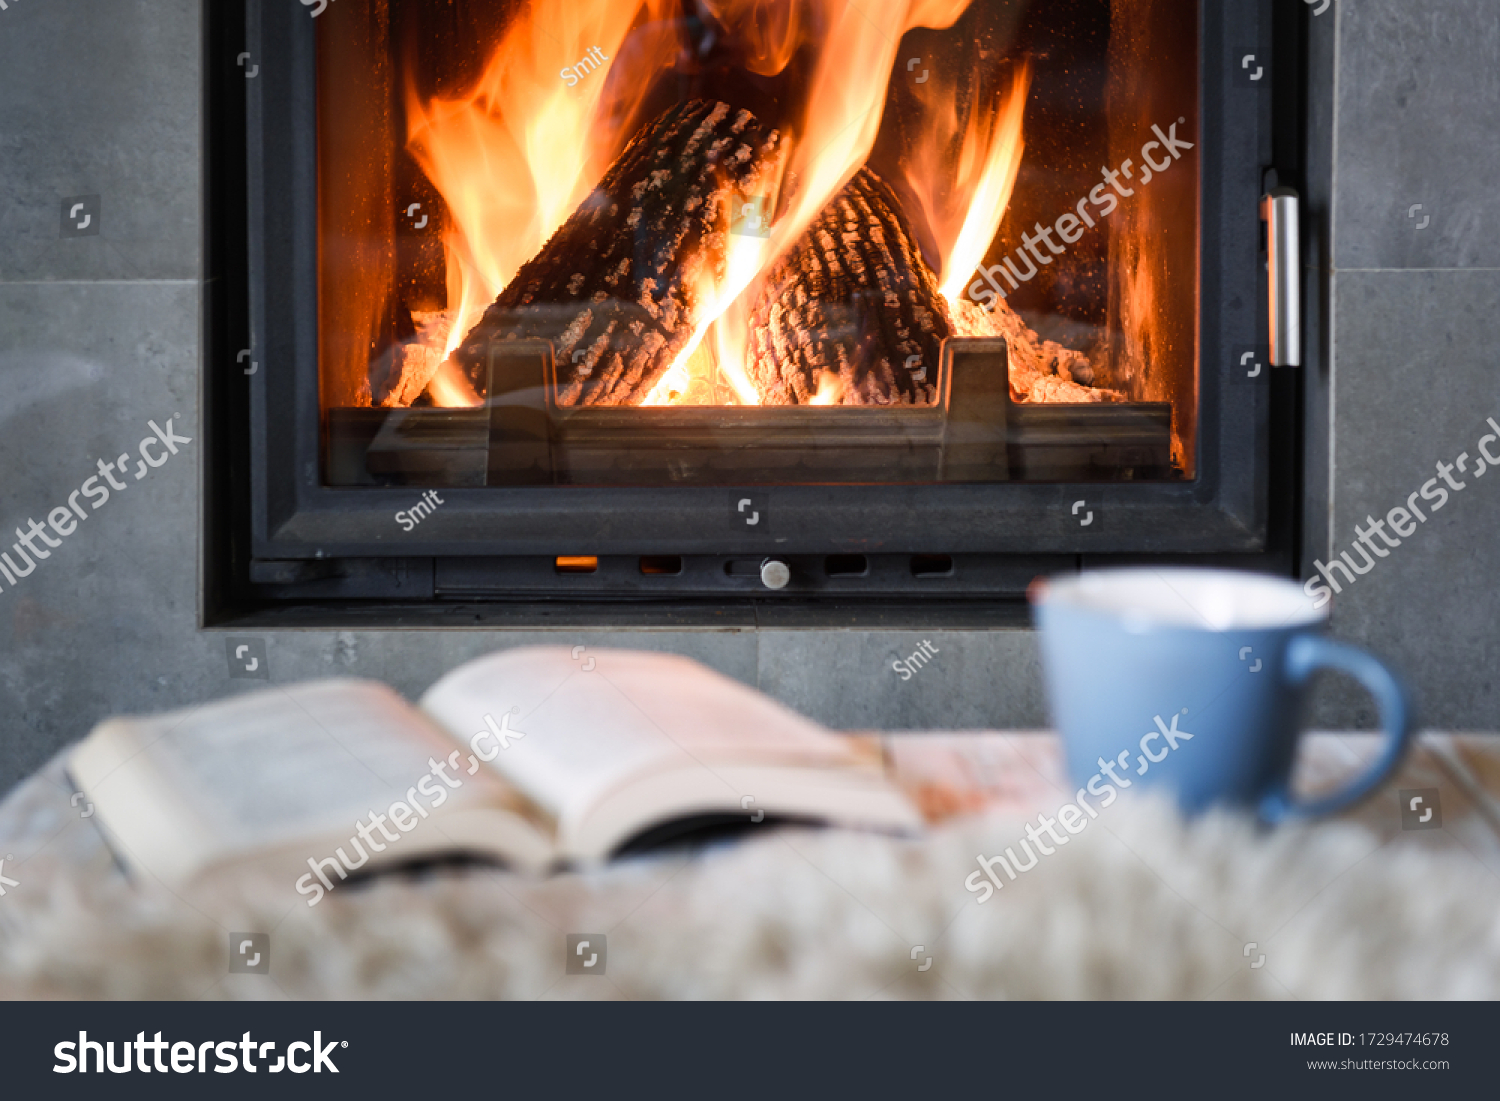 Open book, cup of tea and warm plaid near burning fireplace. Hygge concept #1729474678